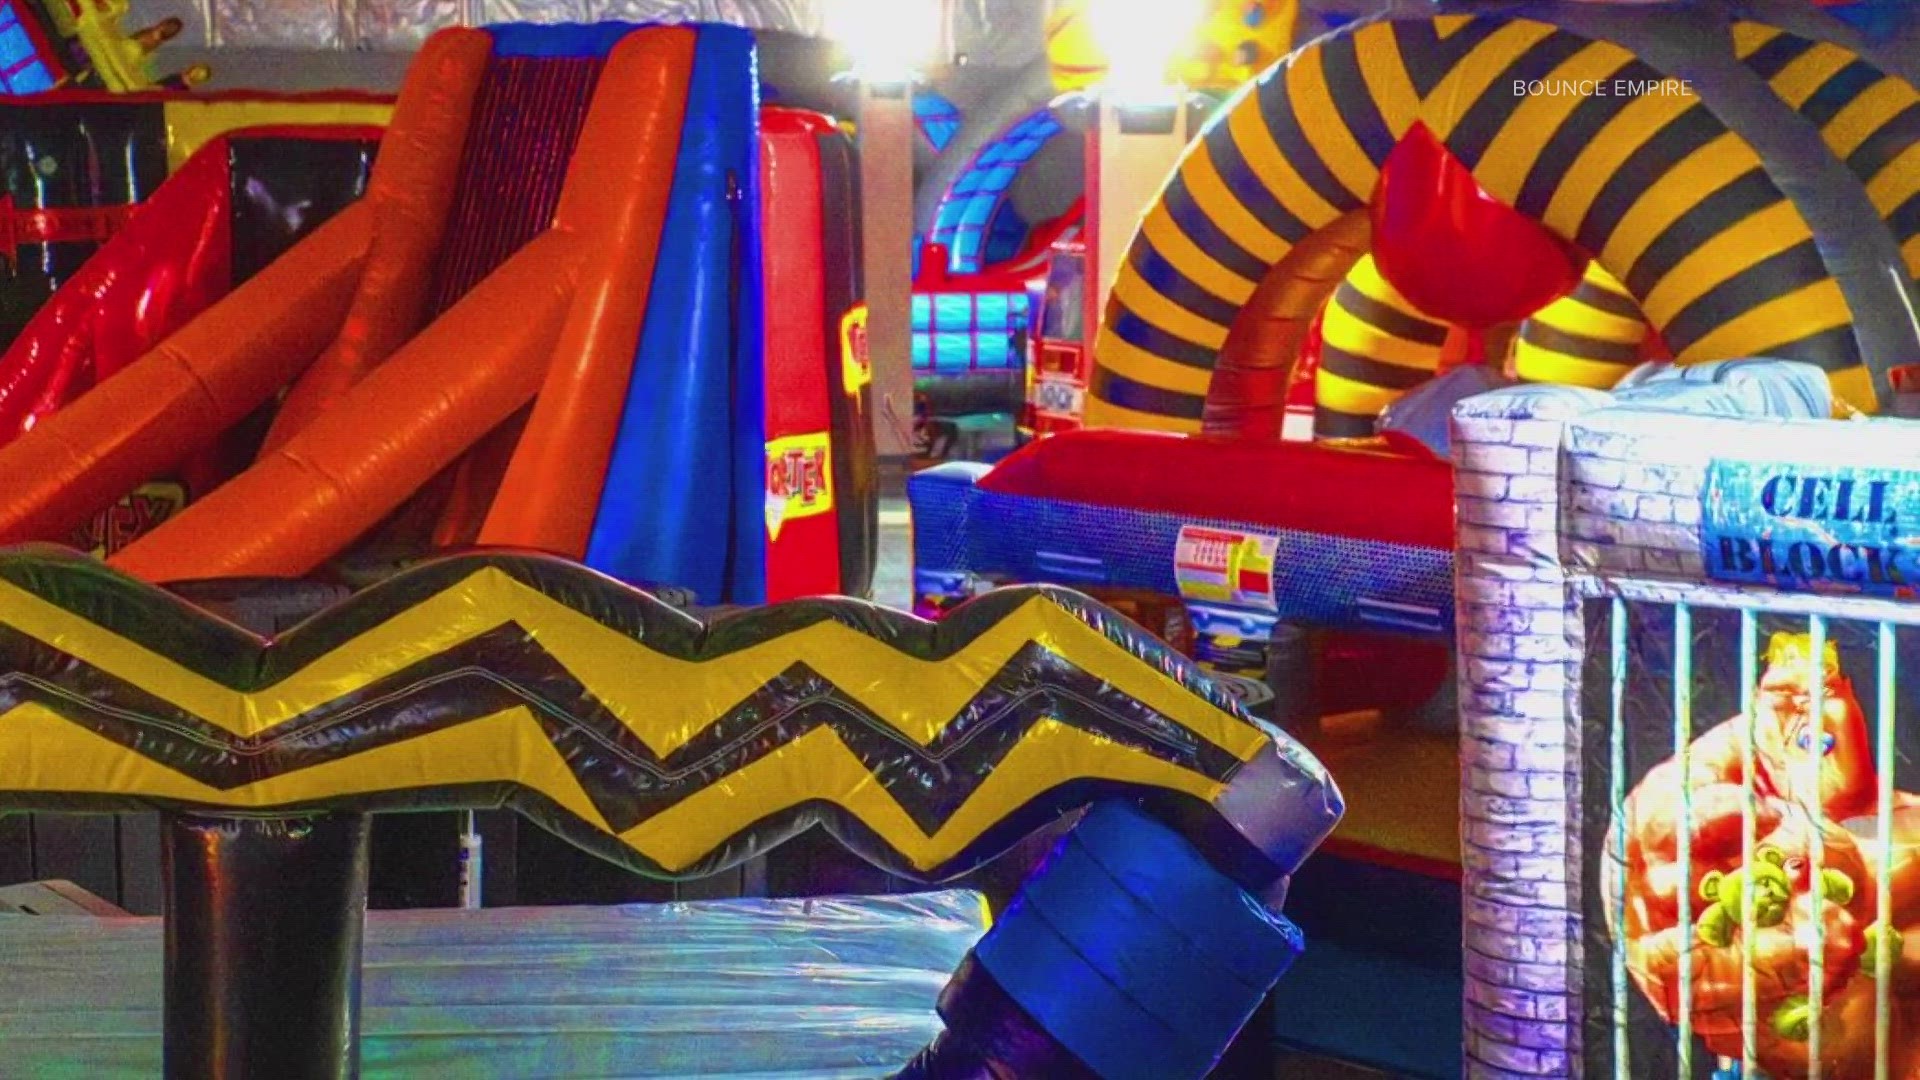 Billed as the world's largest indoor inflatable amusement park, Bounce Empire opens Thursday at 1380 S. Public Road in Lafayette.